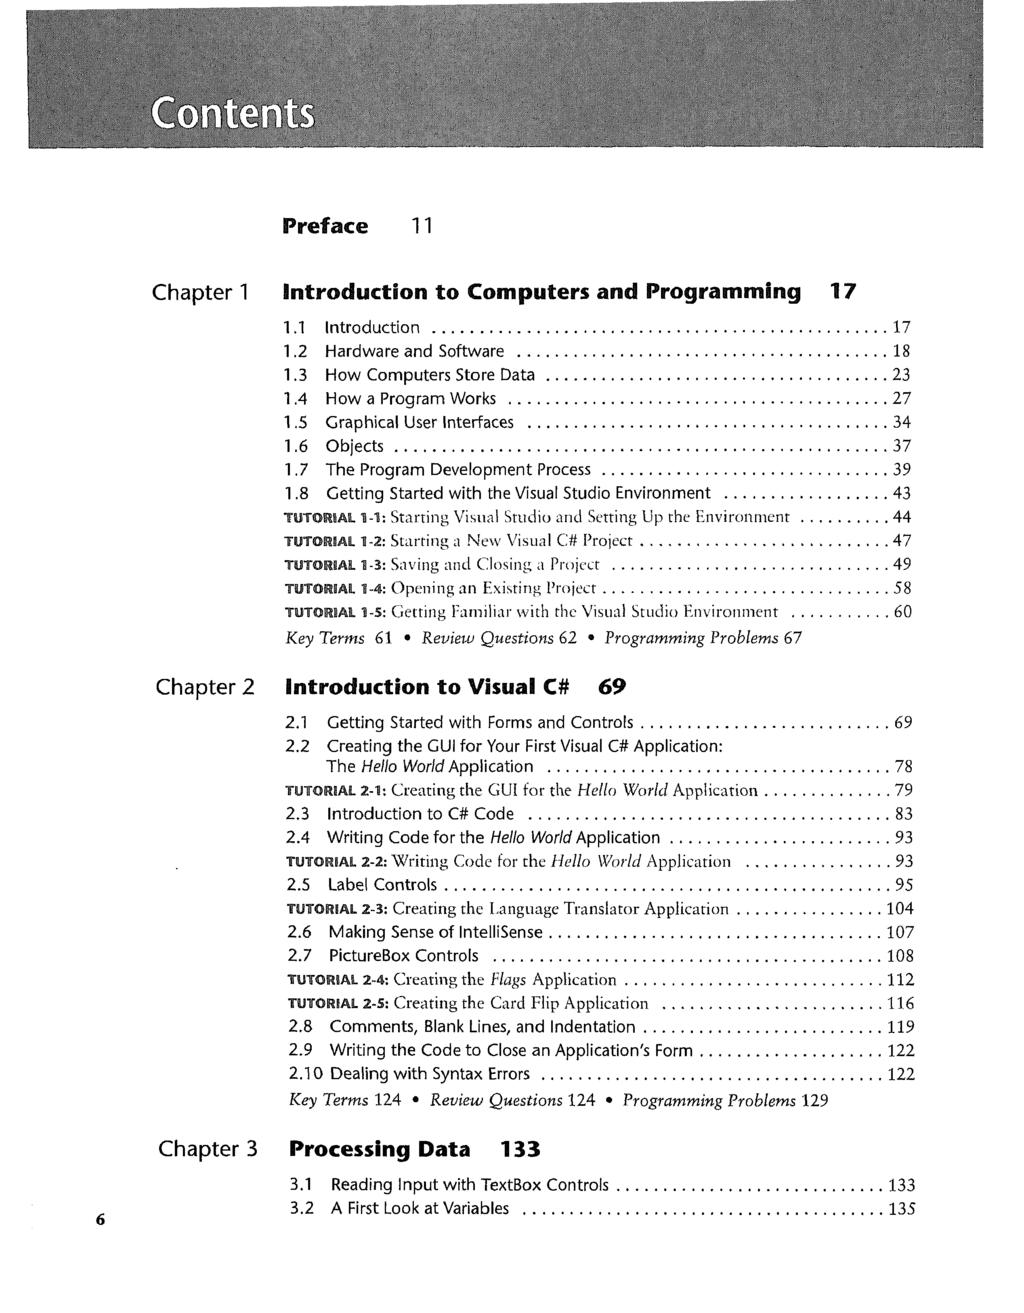 Preface 11 Chapter 1 Introduction to Computers and Programming 17 1.1 Introduction 17 1.2 Hardware and Software 18 1.3 How Computers Store Data 23 1.4 How a Program Works 27 1.